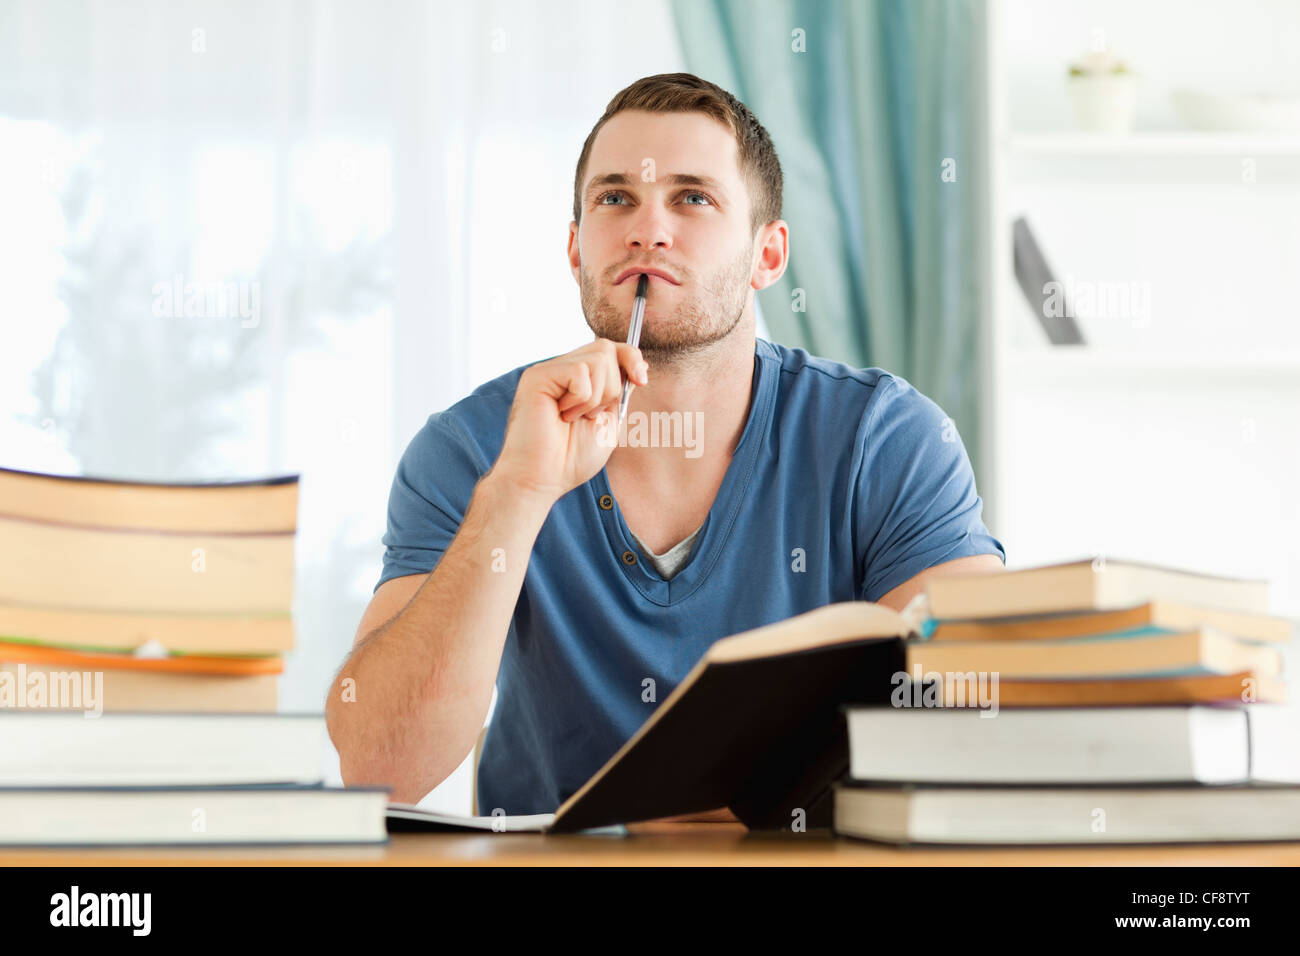 Student in thoughts Stock Photo